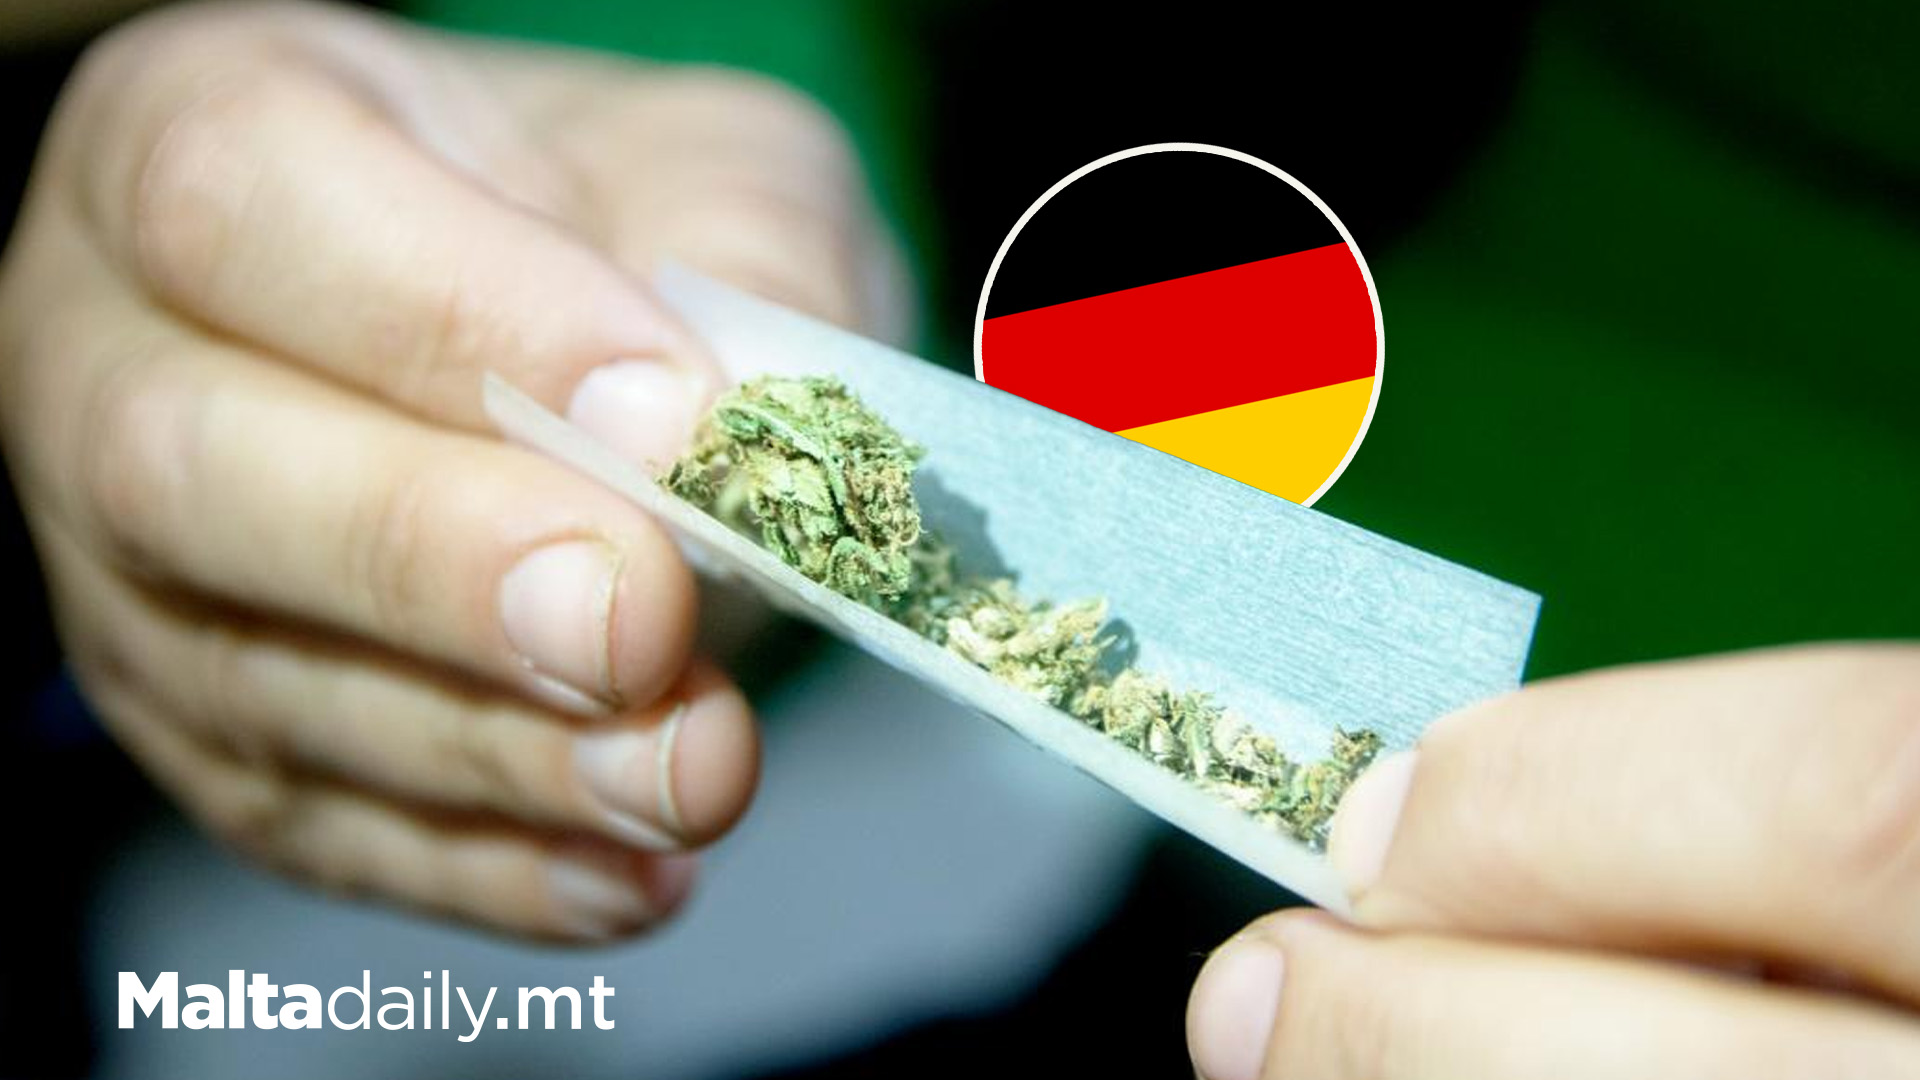 Germany Kicks Off April With Cannabis Legalisation